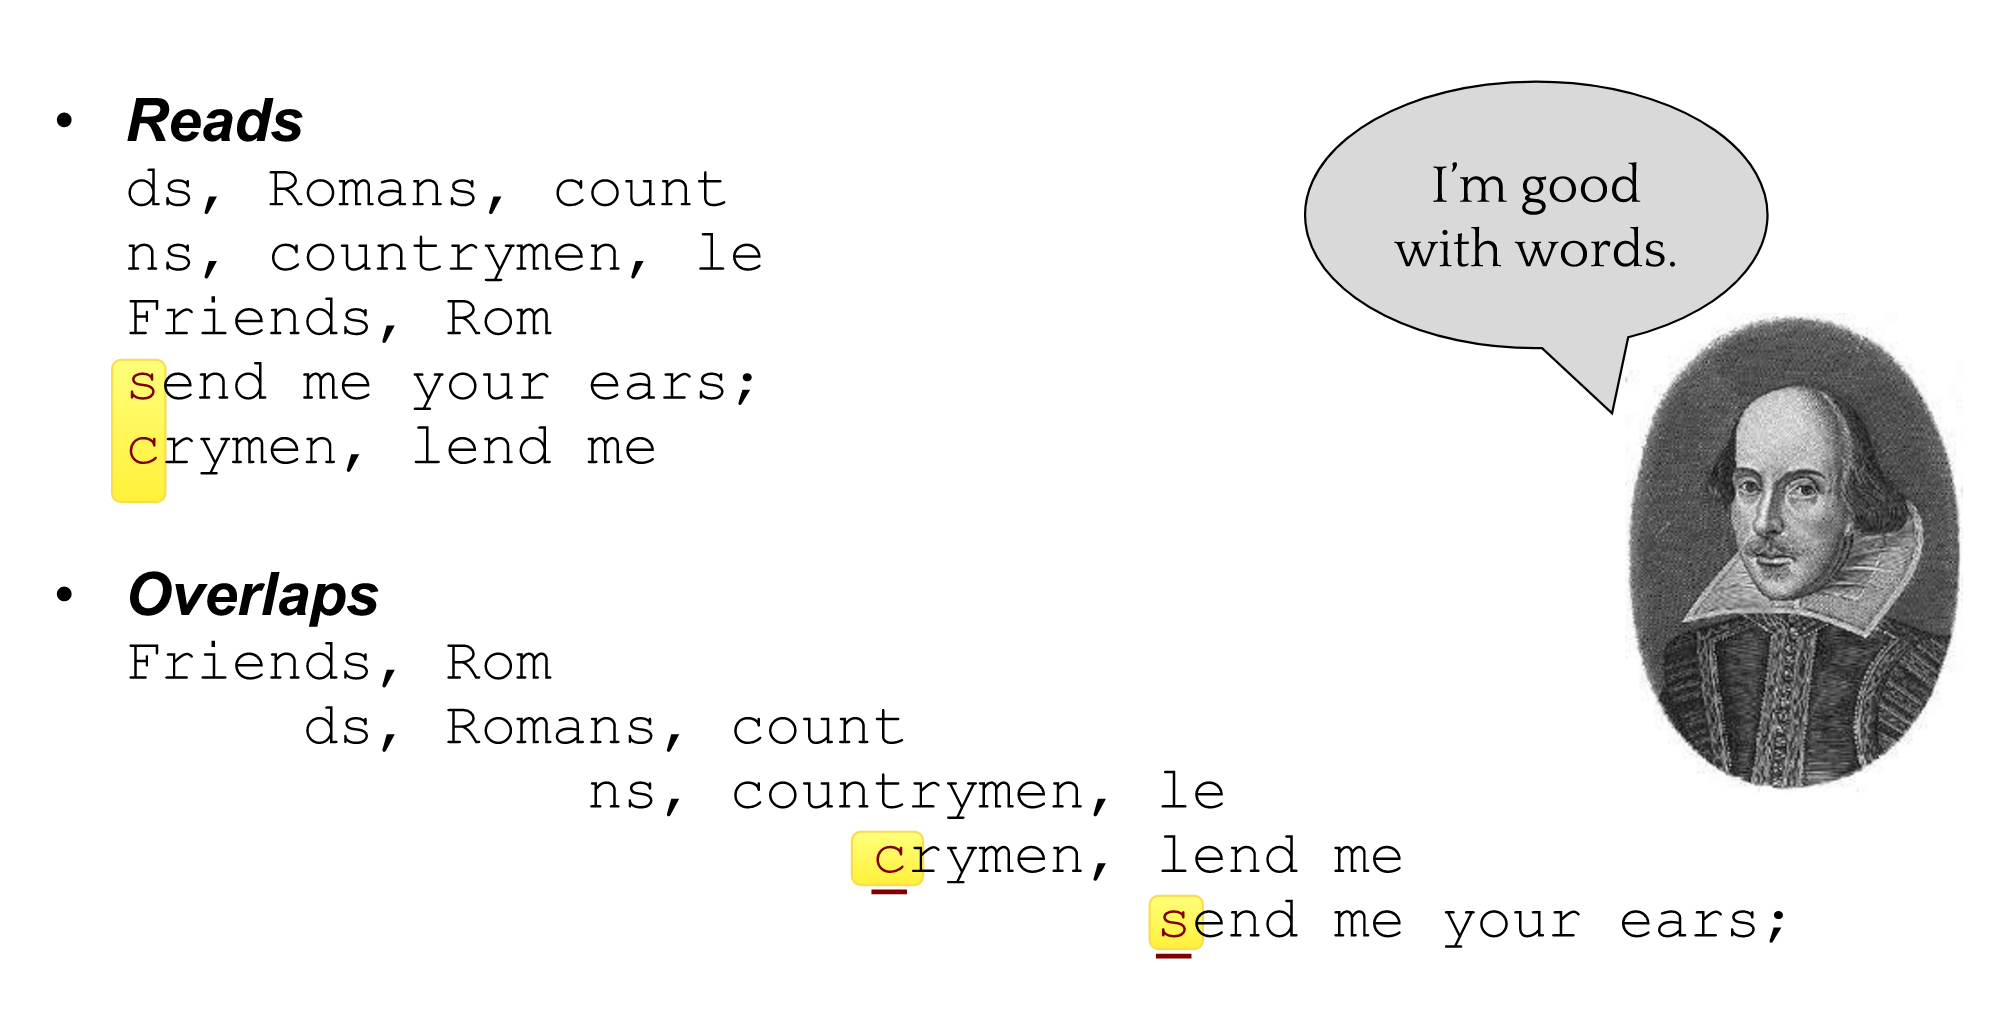 The reads are shown again, now with overlaps below, reconstructing the sentence from the fragments. Shakespeare says I'm good with words. Crymen and "send me your ears" have their first letters highlighted in yellow due to their typos.